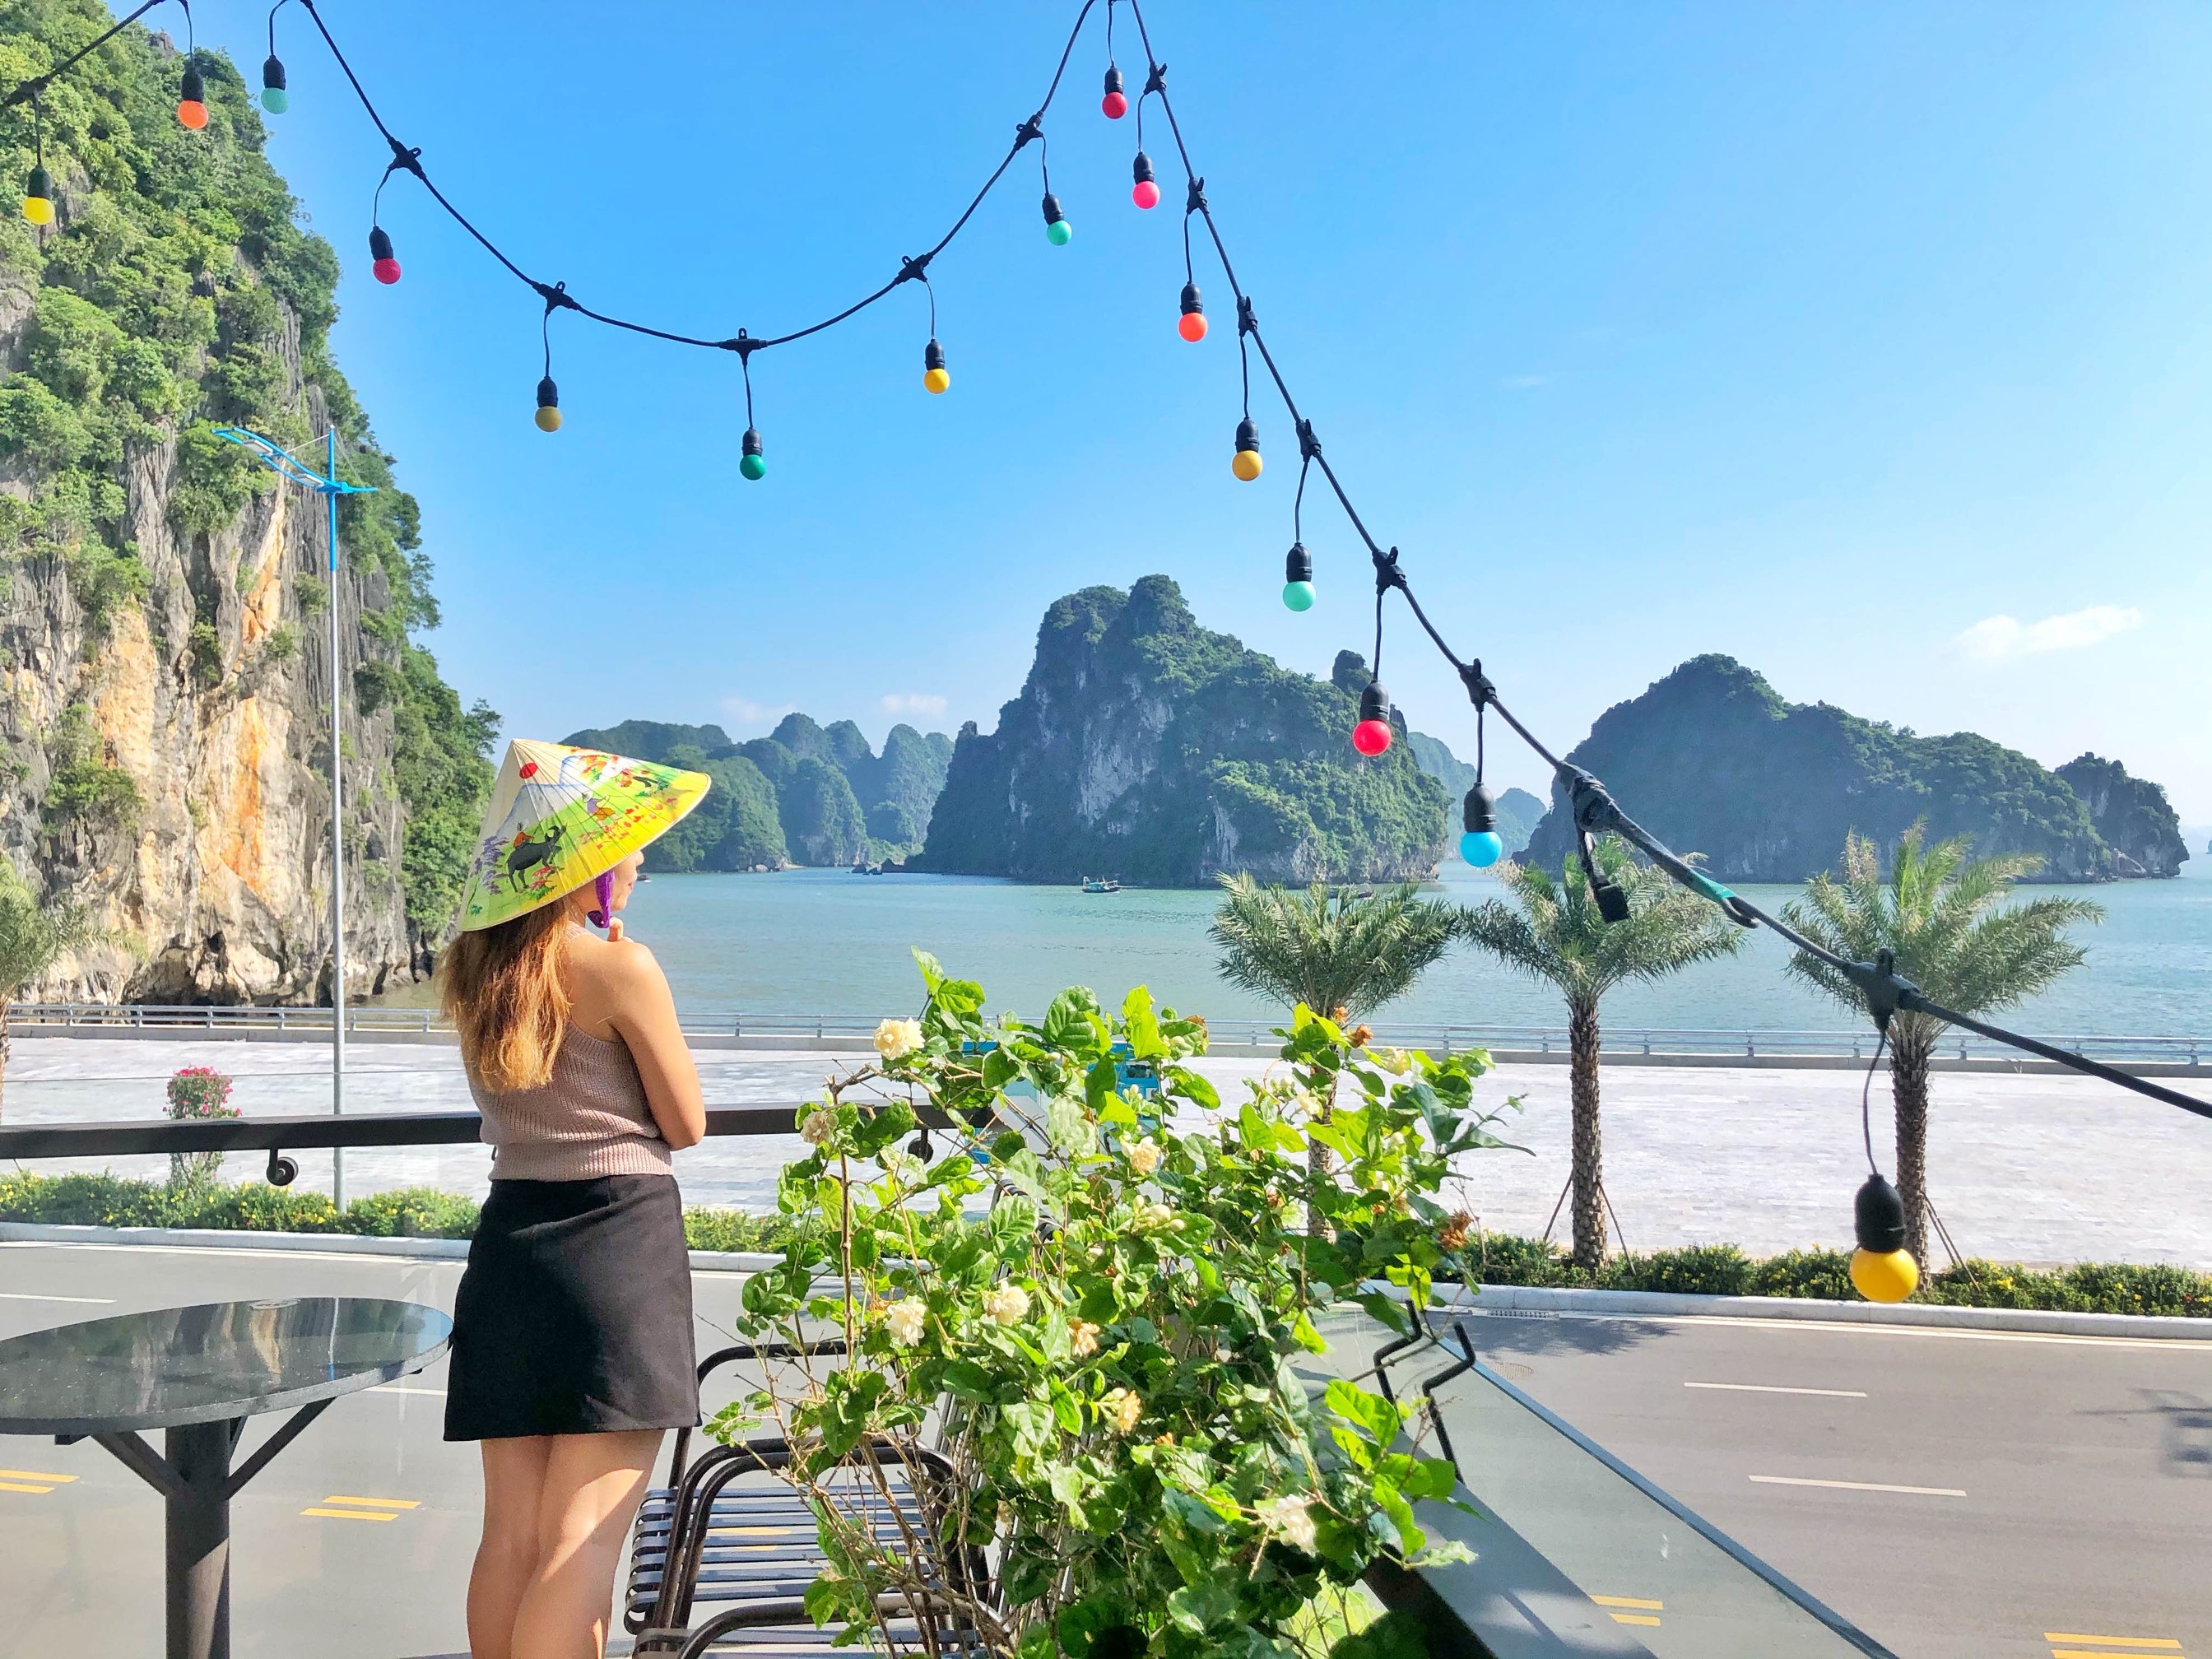 Take a second to stop and appreciate the beauty of Ha Long Bay in Vietnam